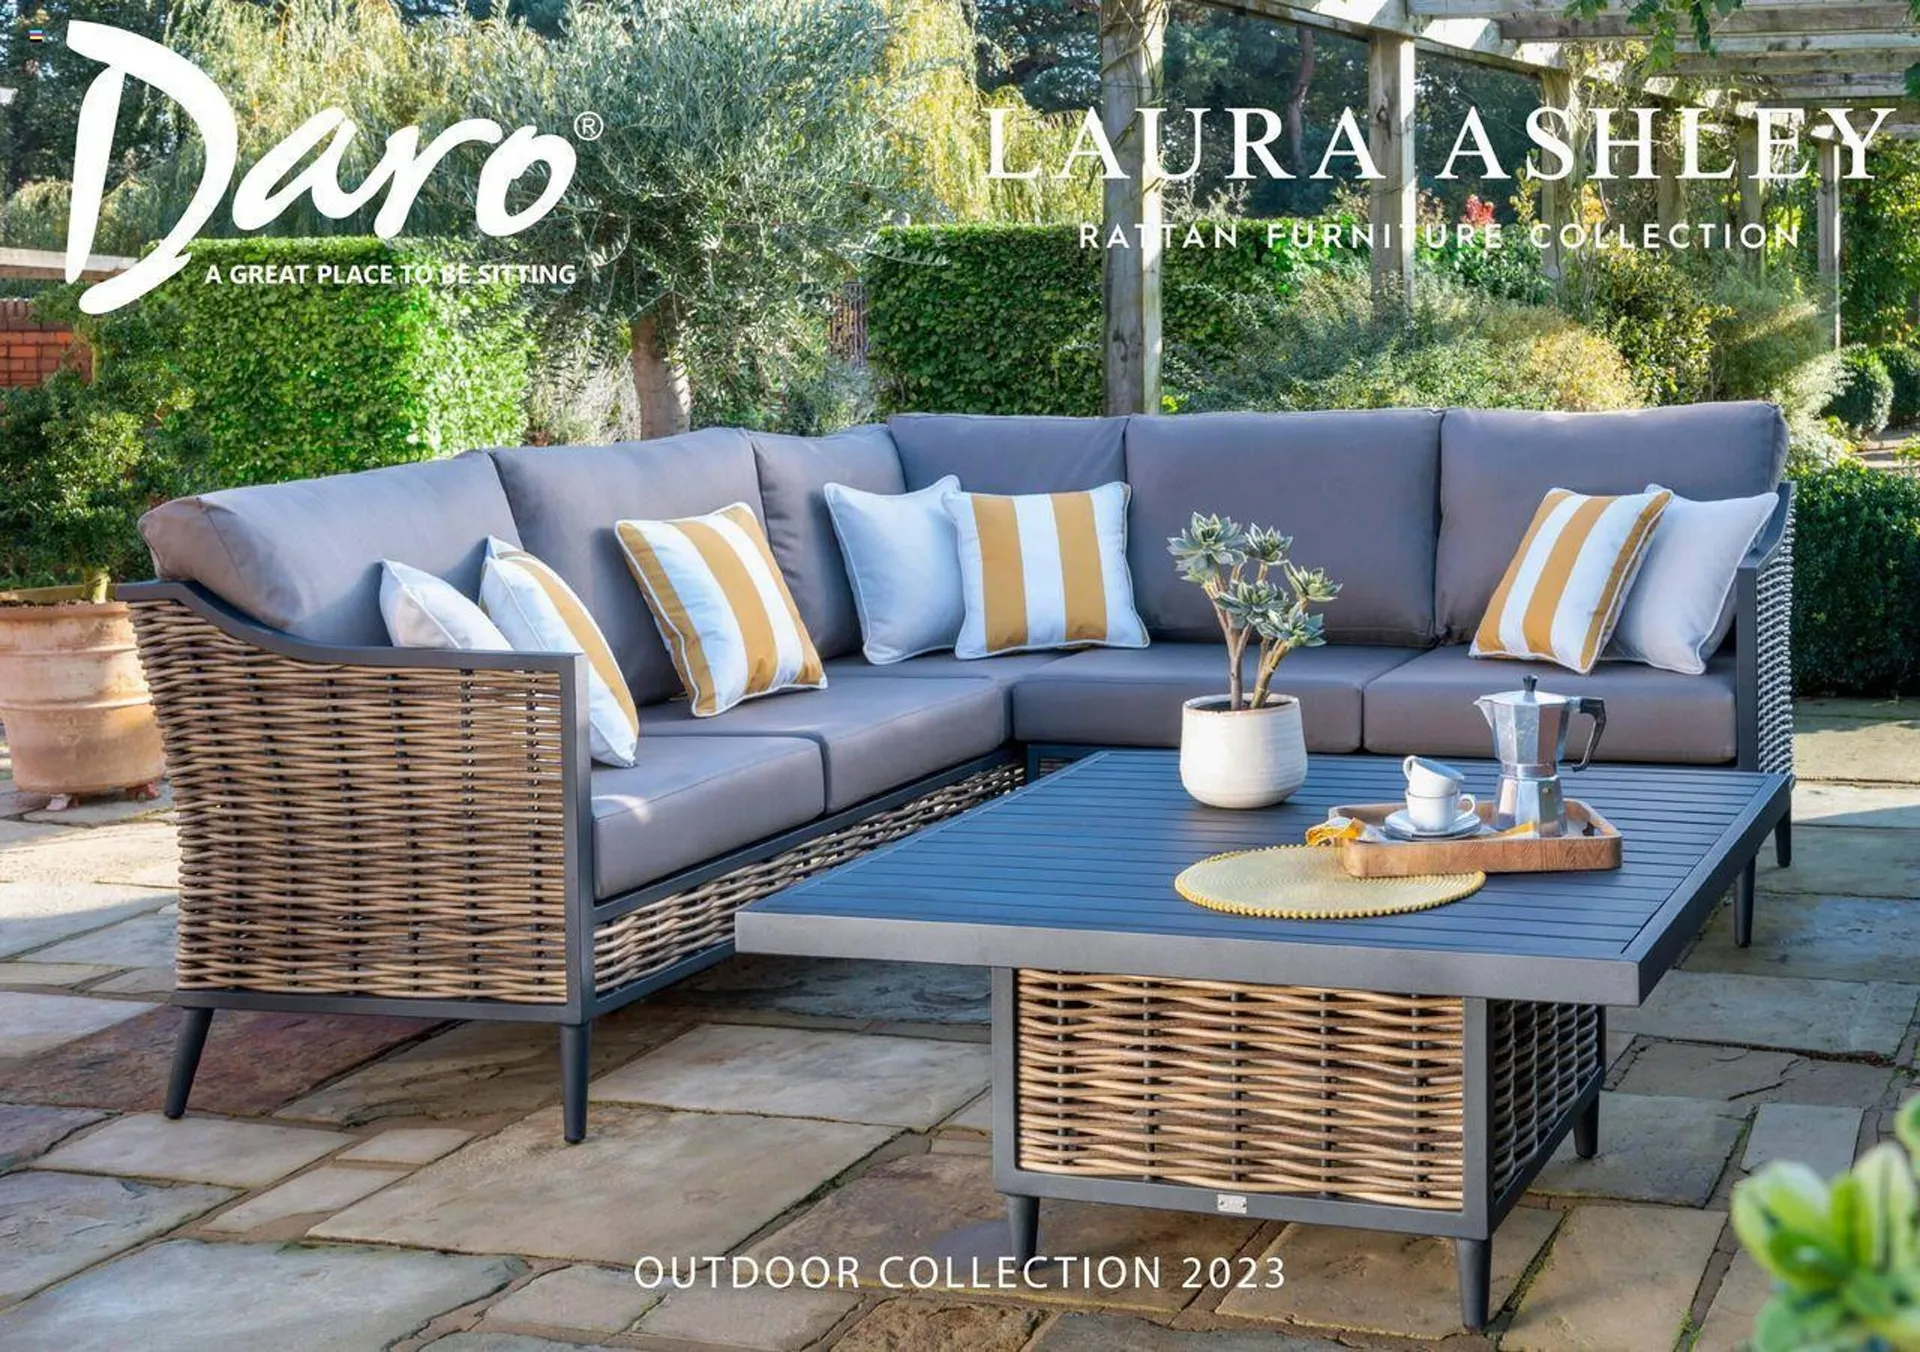 Laura Ashley Weekly Offers